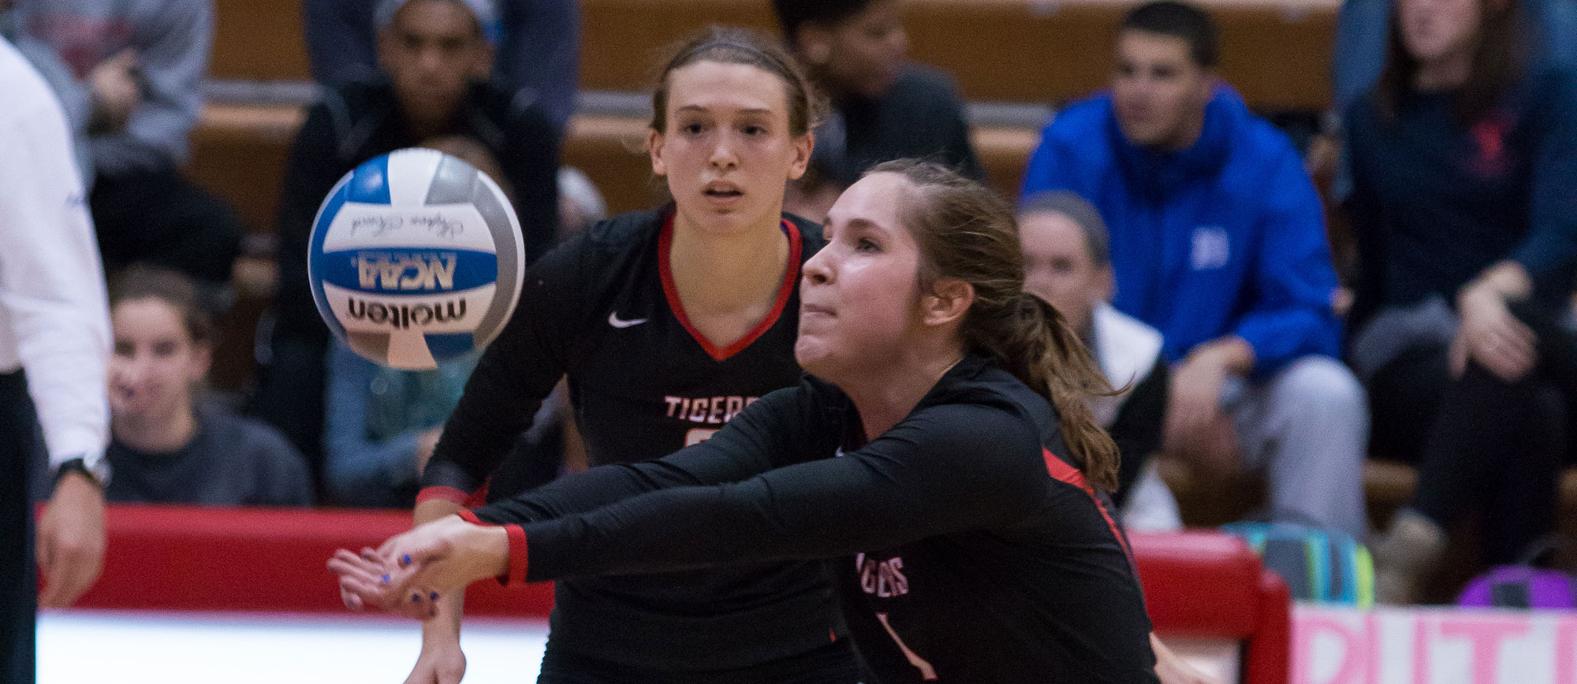 Courtney Huck and Kara Seidenstricker led Wittenberg in kills and assists respectively in a 3-0 win at Otterbein. File Photo | Erin Pence